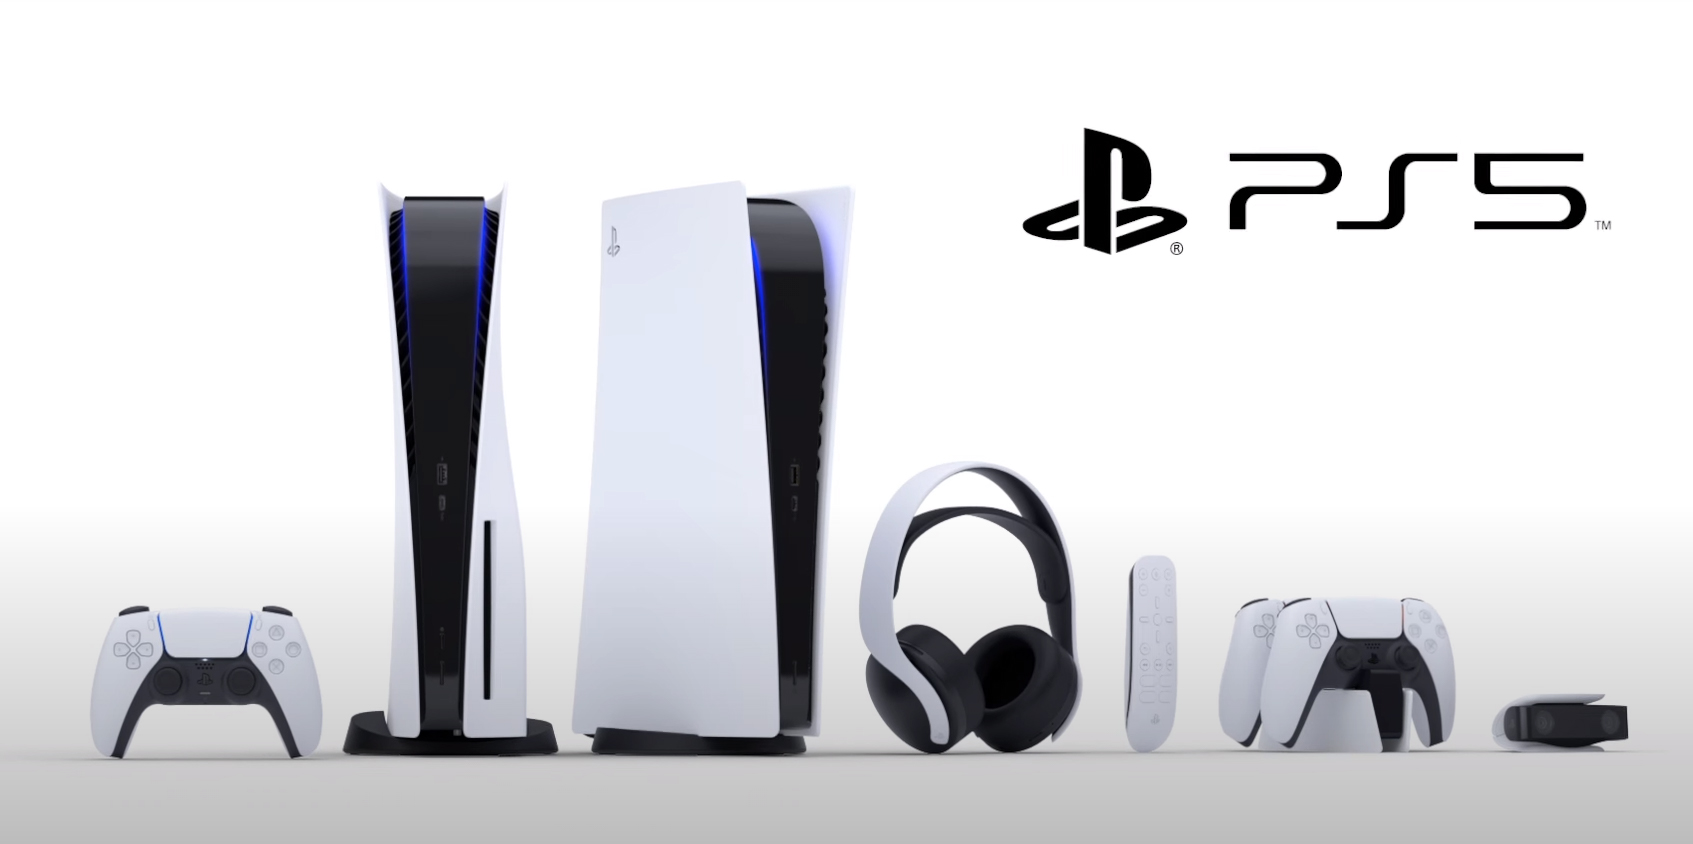 PS5 will get “beautiful” and “hopefully radical” special editions | T3